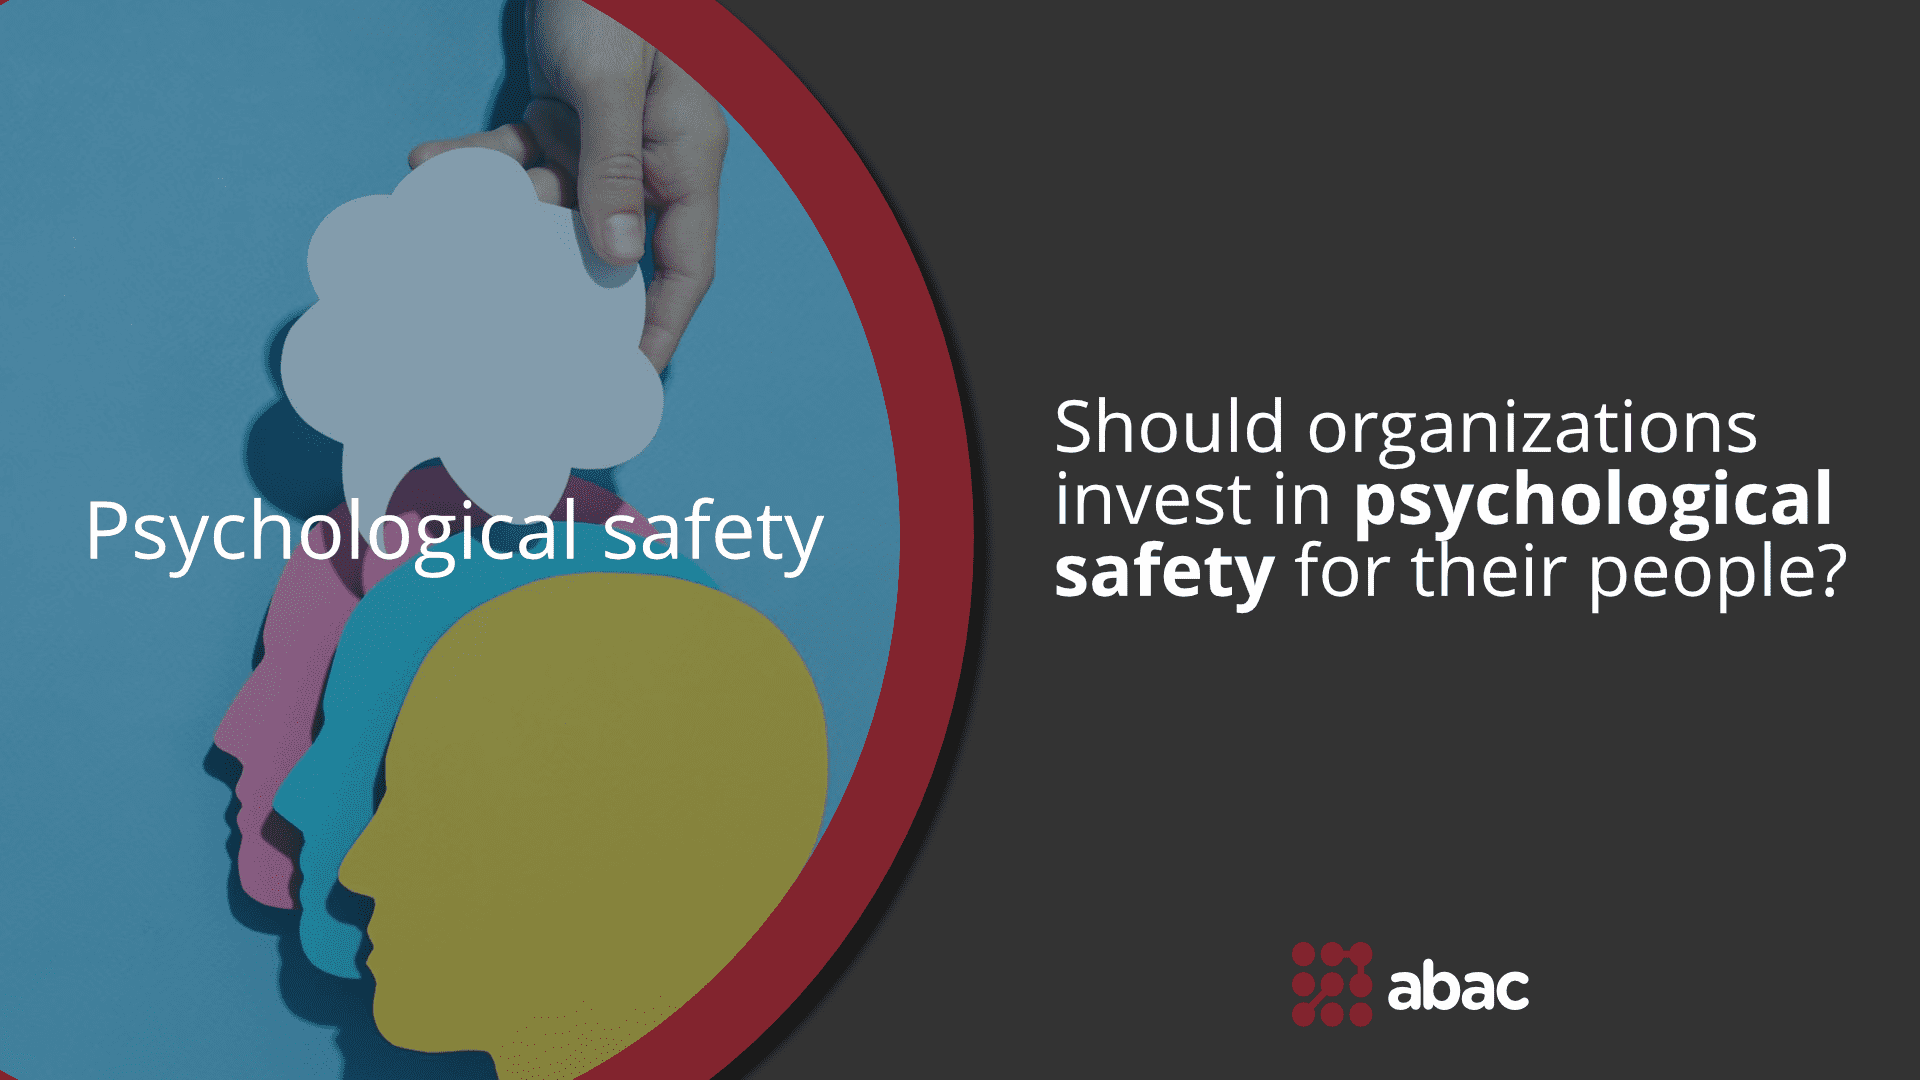 A culture of psychological safety: why does it matter?